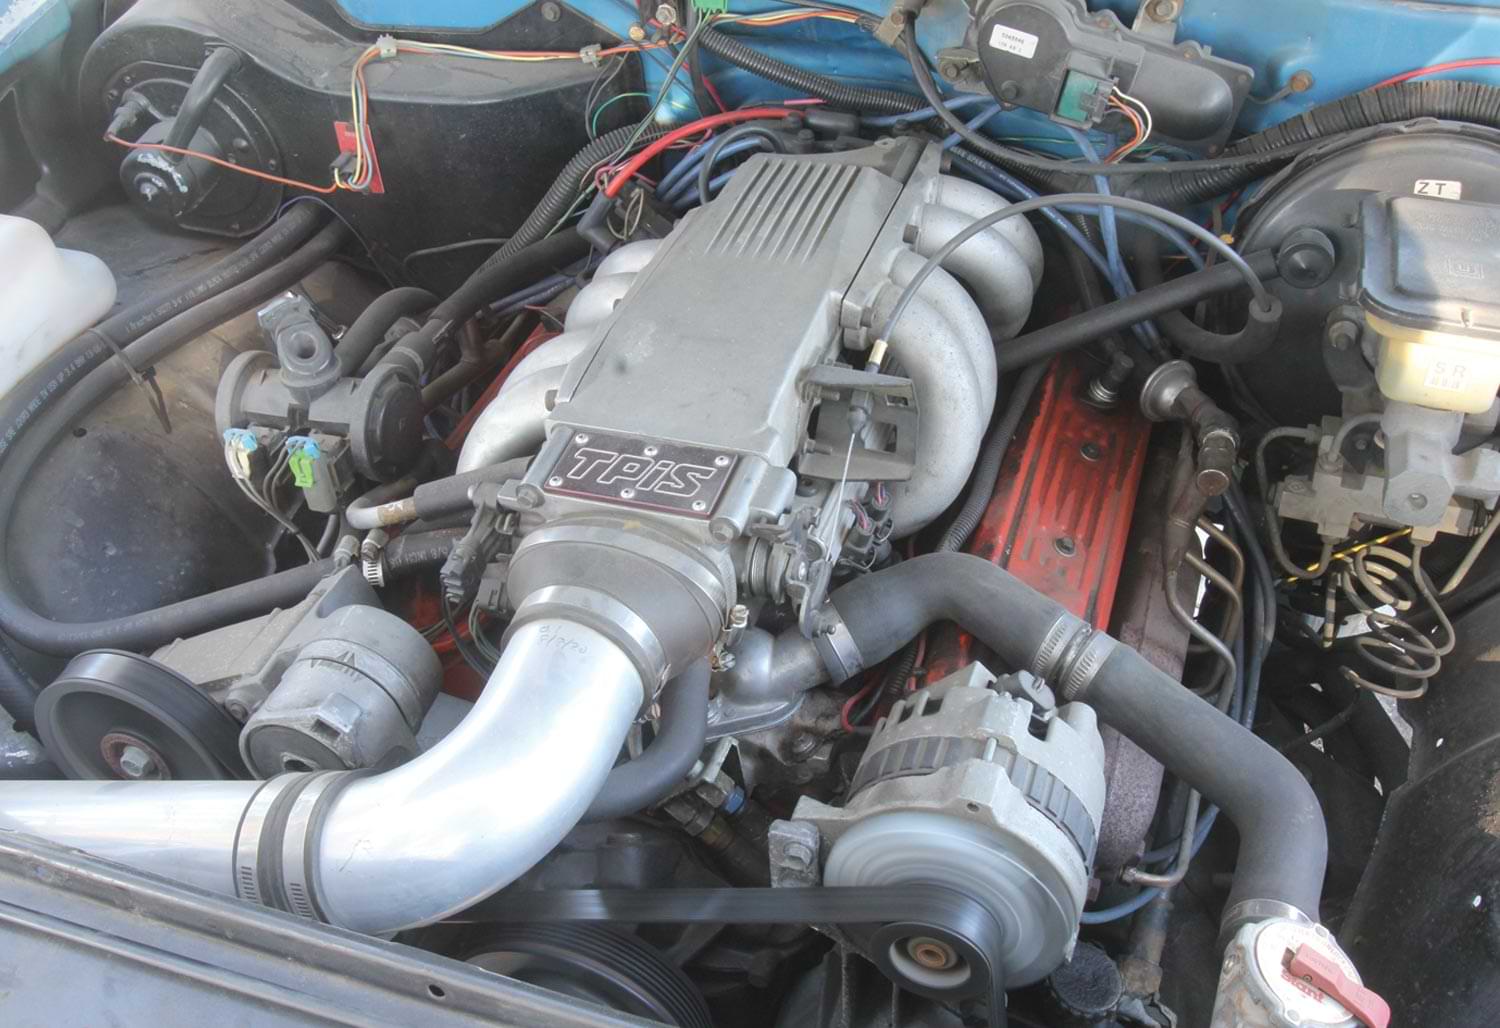 the TPI engine in the small block S-10 truck